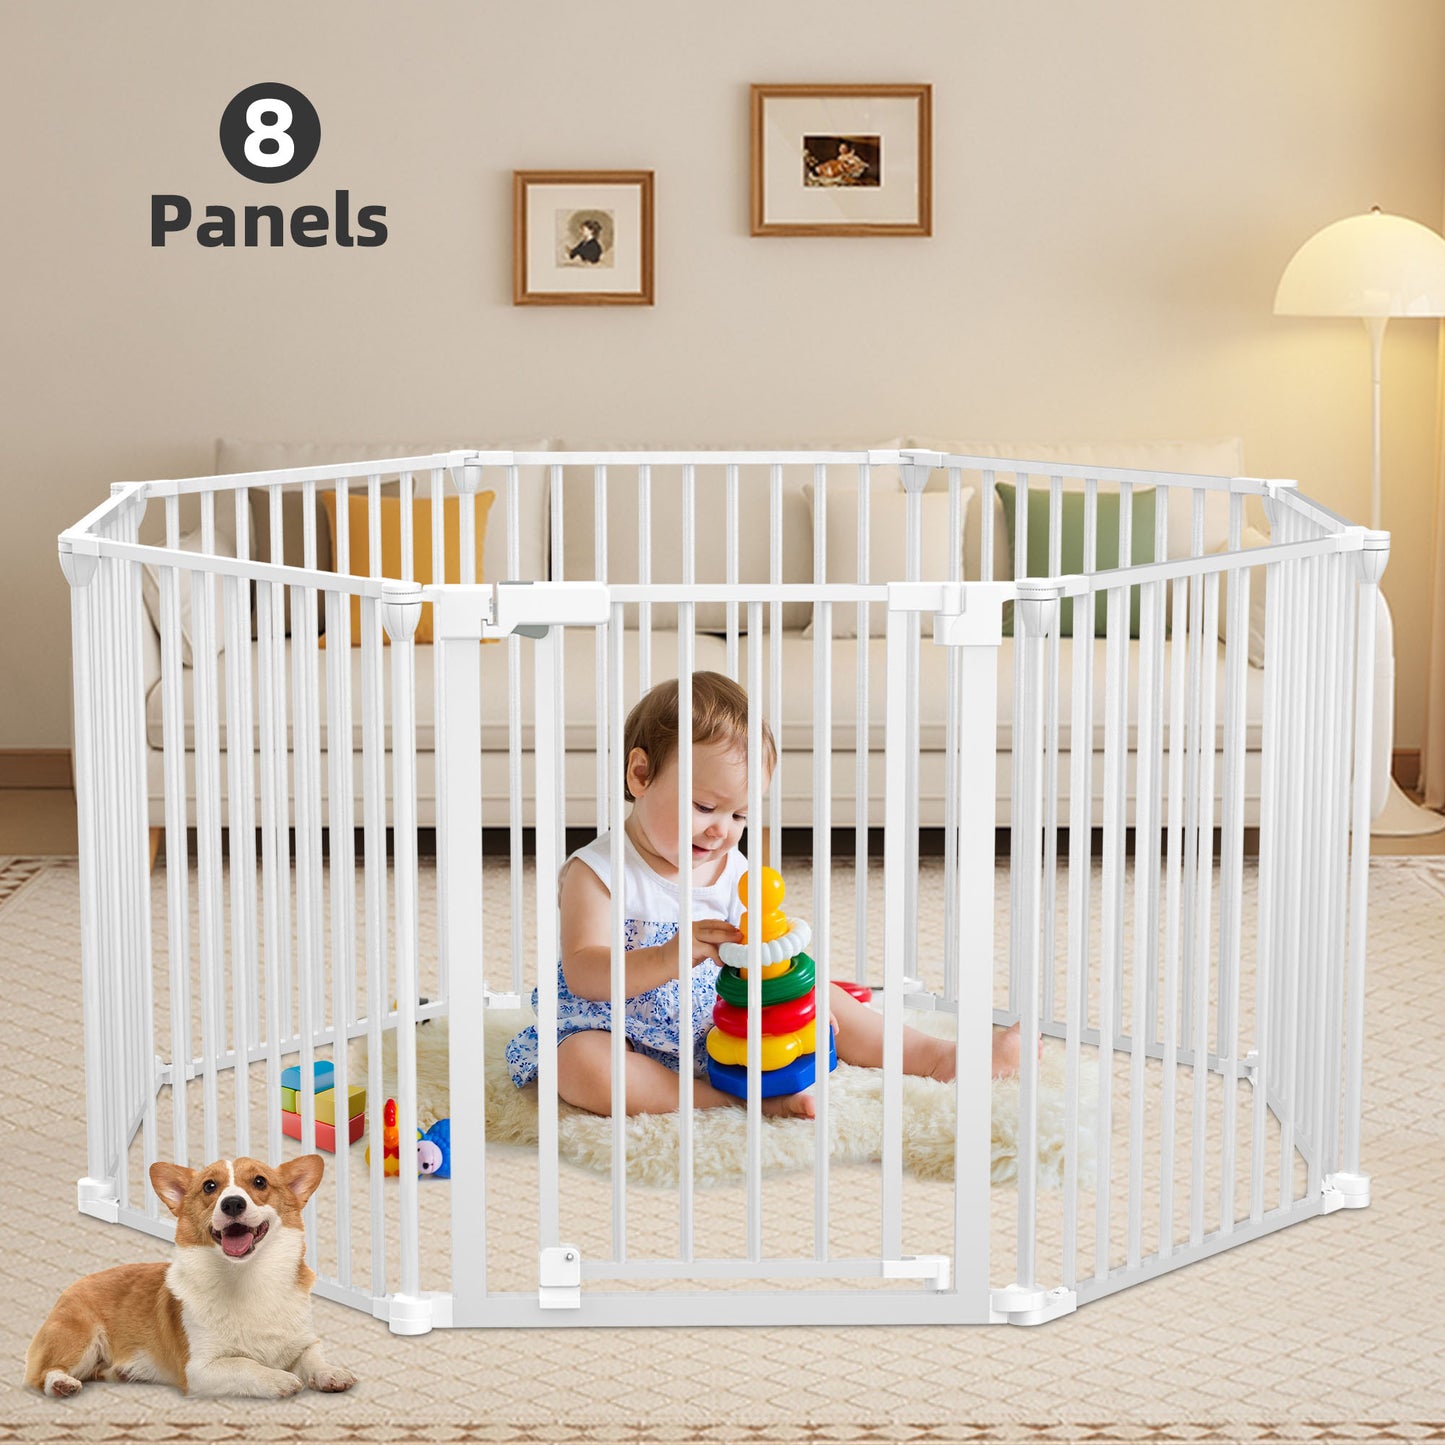 Wisairt 8 Panels Extra Wide Baby Gate,196.6 Inch Adjustable Baby Safety Gate Play Yard with Auto Close for Aged 6+ Months